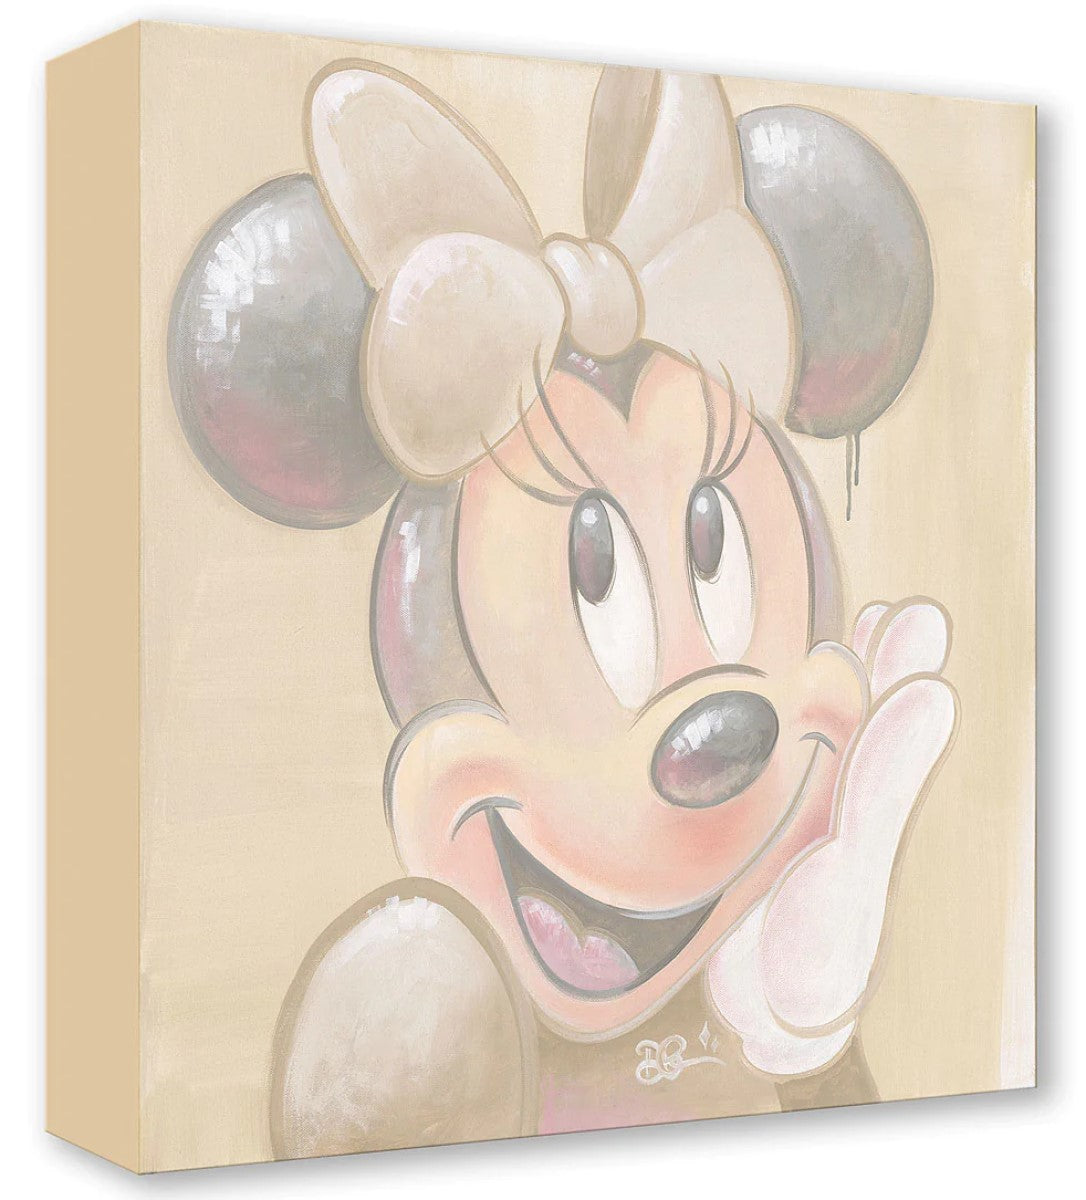 Take A Bow by Dom Corona featuring Minnie Mouse Treasures On Canvas